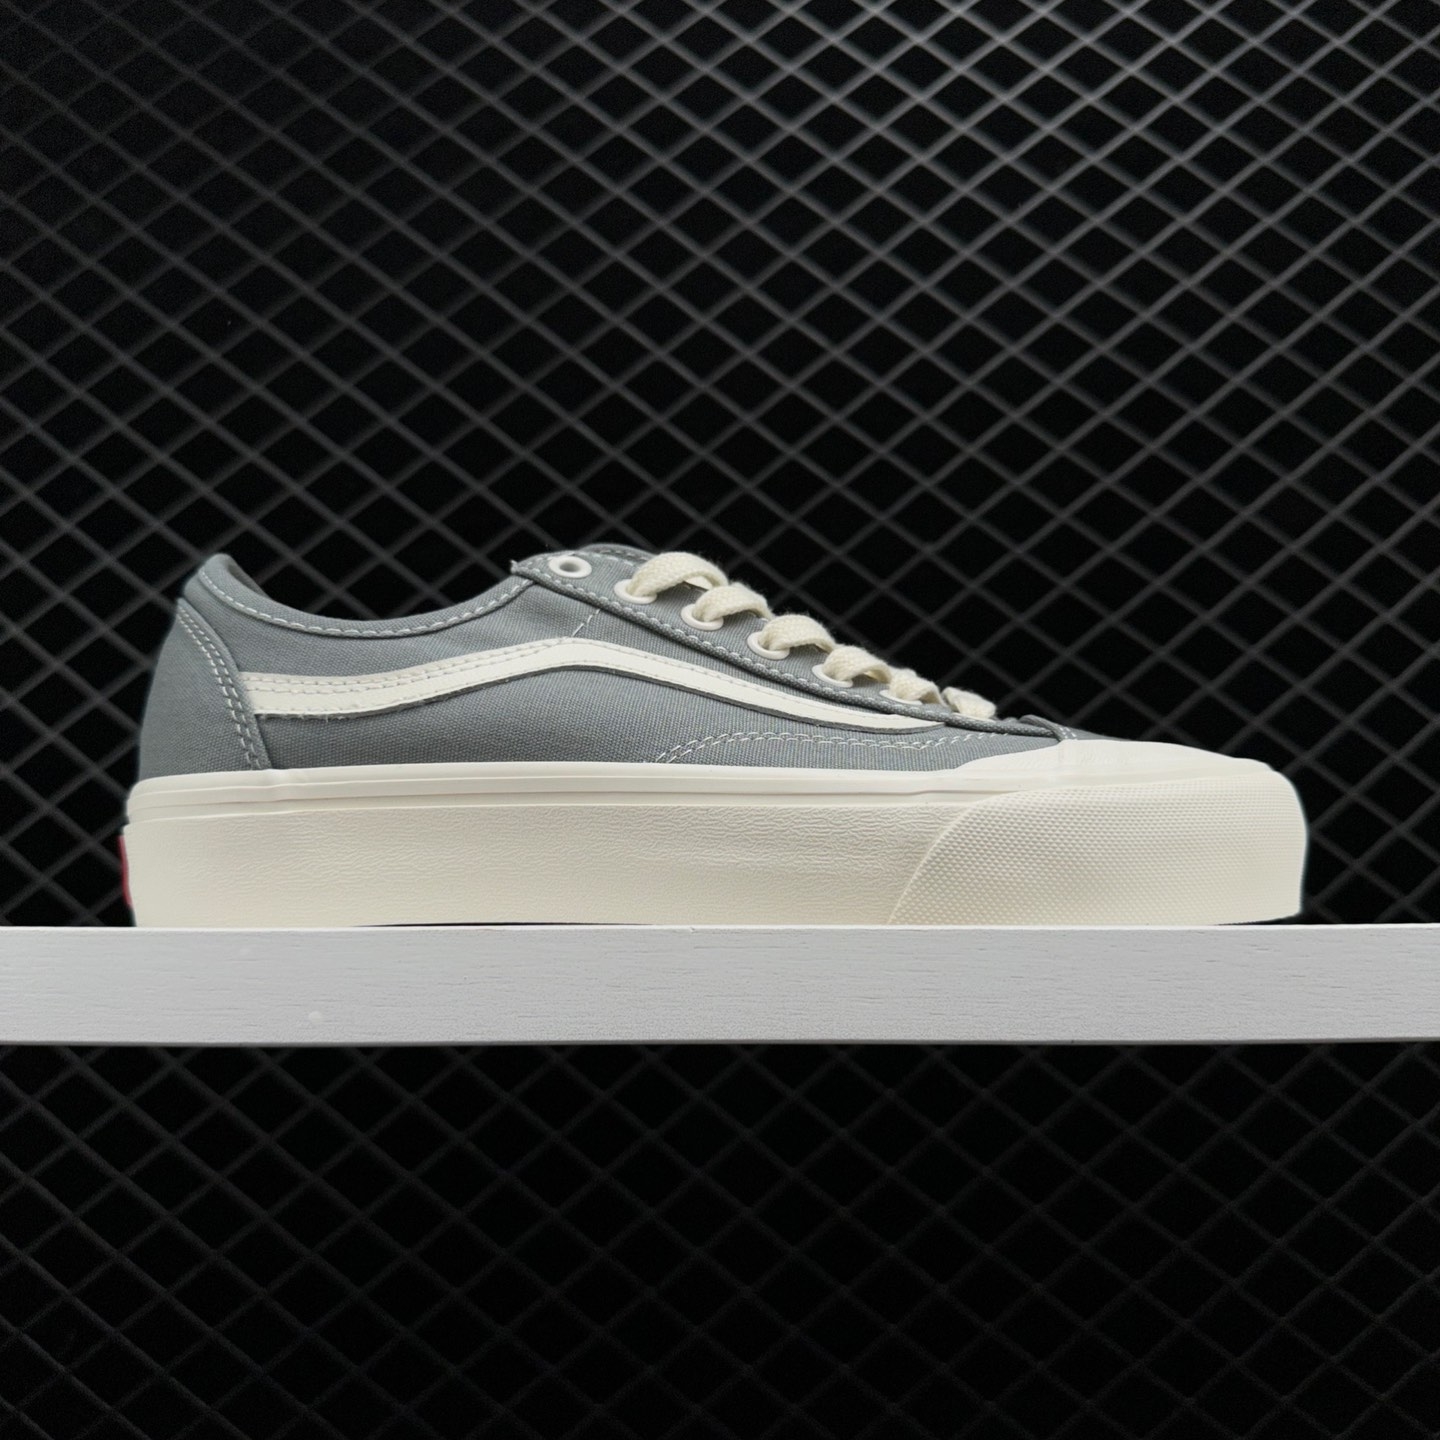 Vans OG Old Skool LX 'Pig Suede - Grey Dawn' VN0A4P3XUNY: Classic Style Meets Subtle Luxury